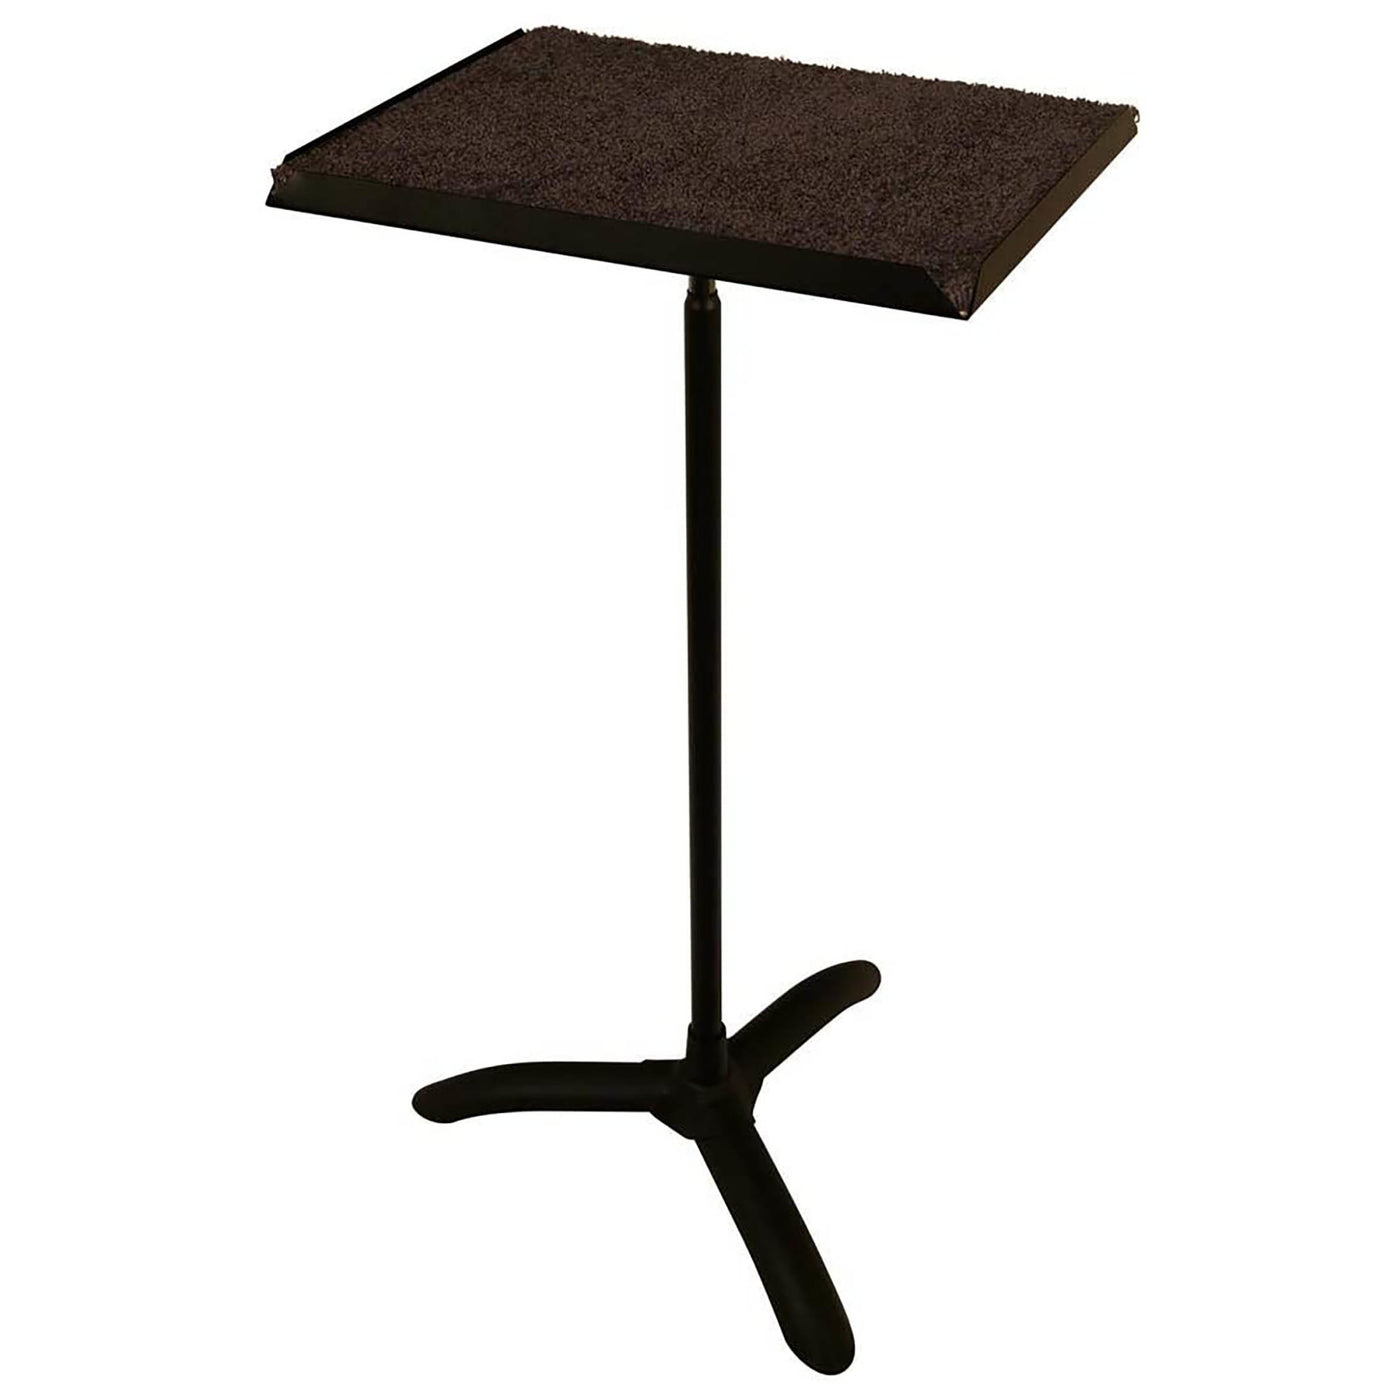 Manhasset Percussion Trap Table with 48 base - 2200